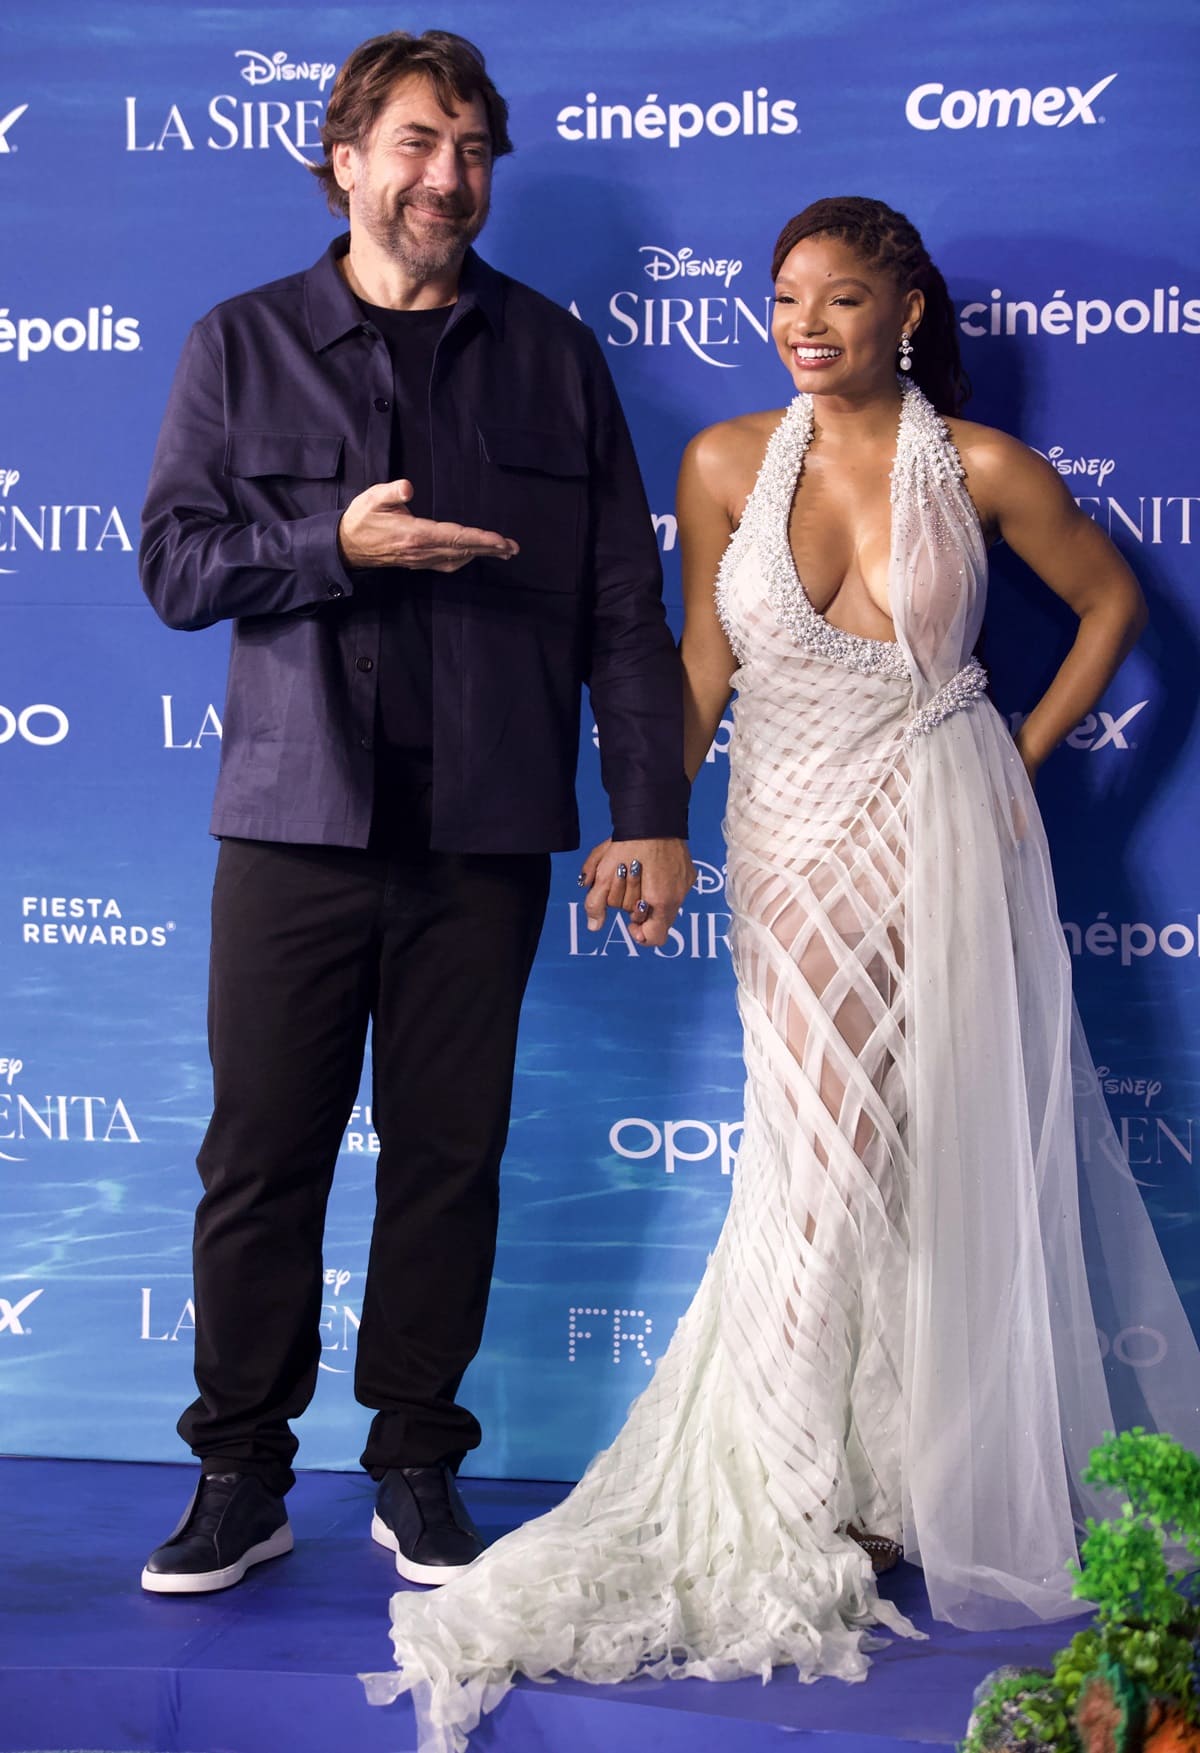 Javier Bardem, who plays King Triton, and Halle Bailey pose during the fan event for the Premiere of Disney's "The Little Mermaid"